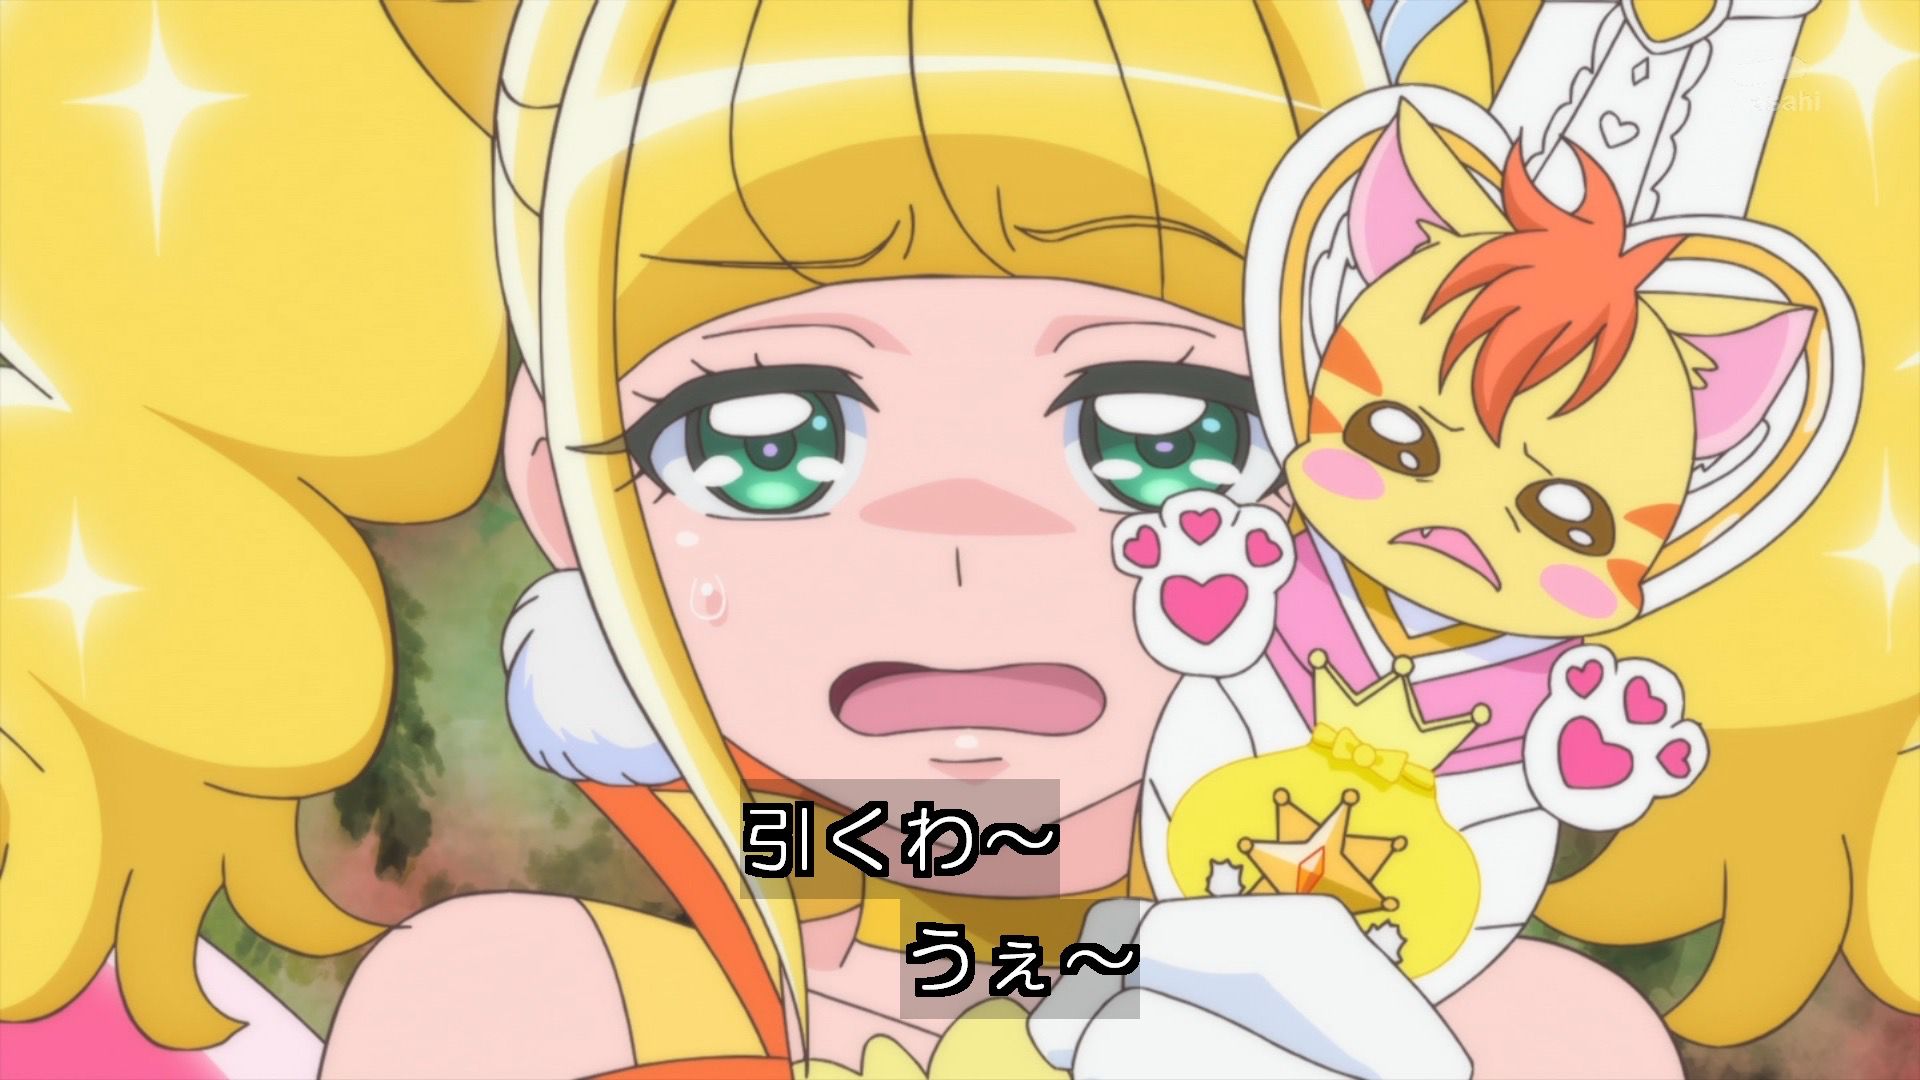 This child of Precure yaba is so cute wwwww 8